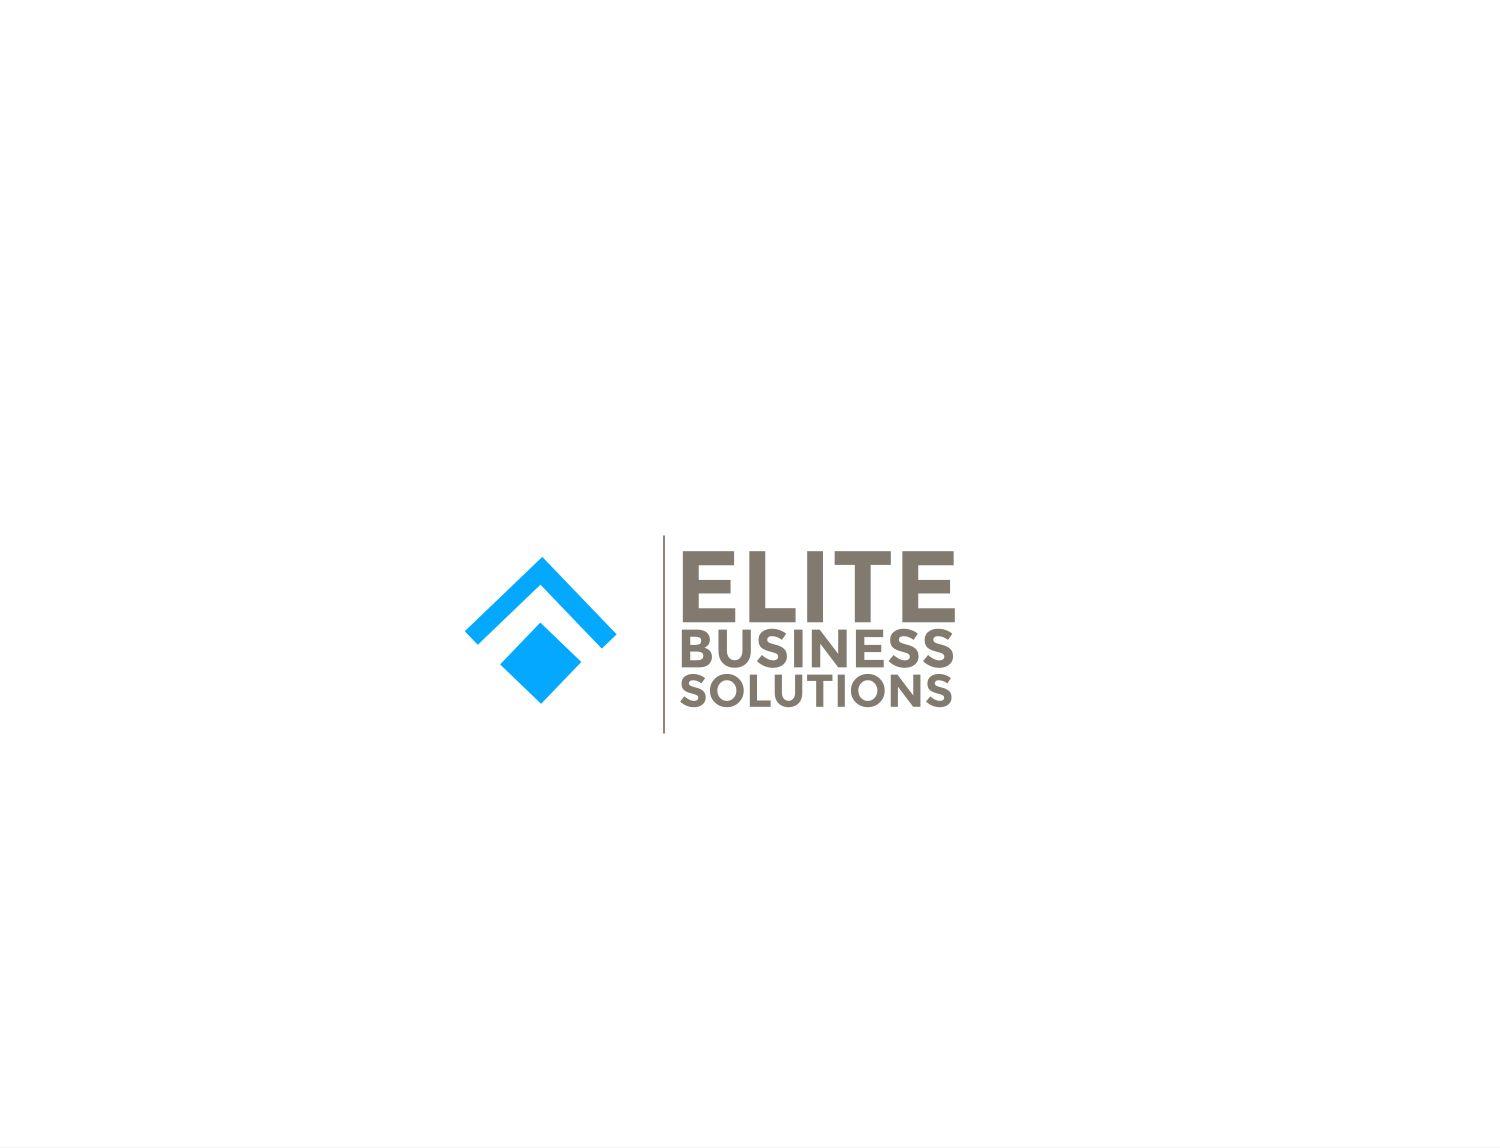 Outsource Logo - Human Resource Logo Design for our company is Elite Business ...